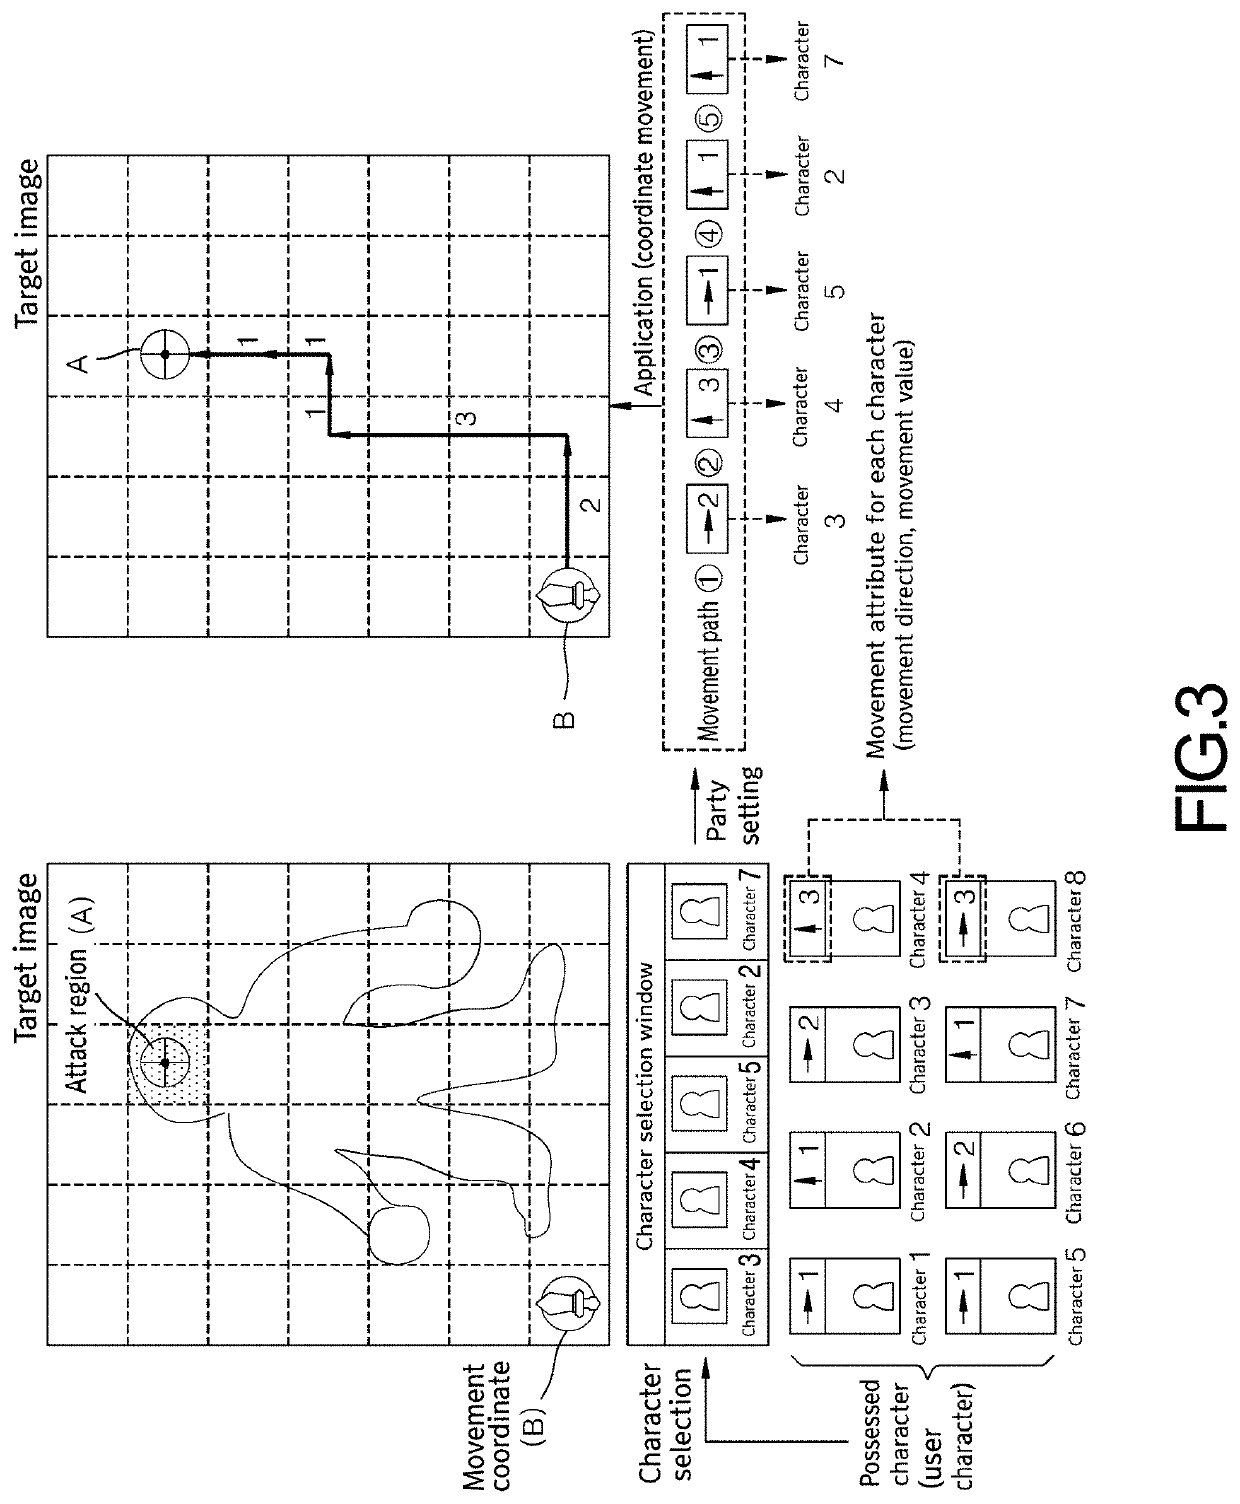 Gaming system and method for attack targeted at coordinates